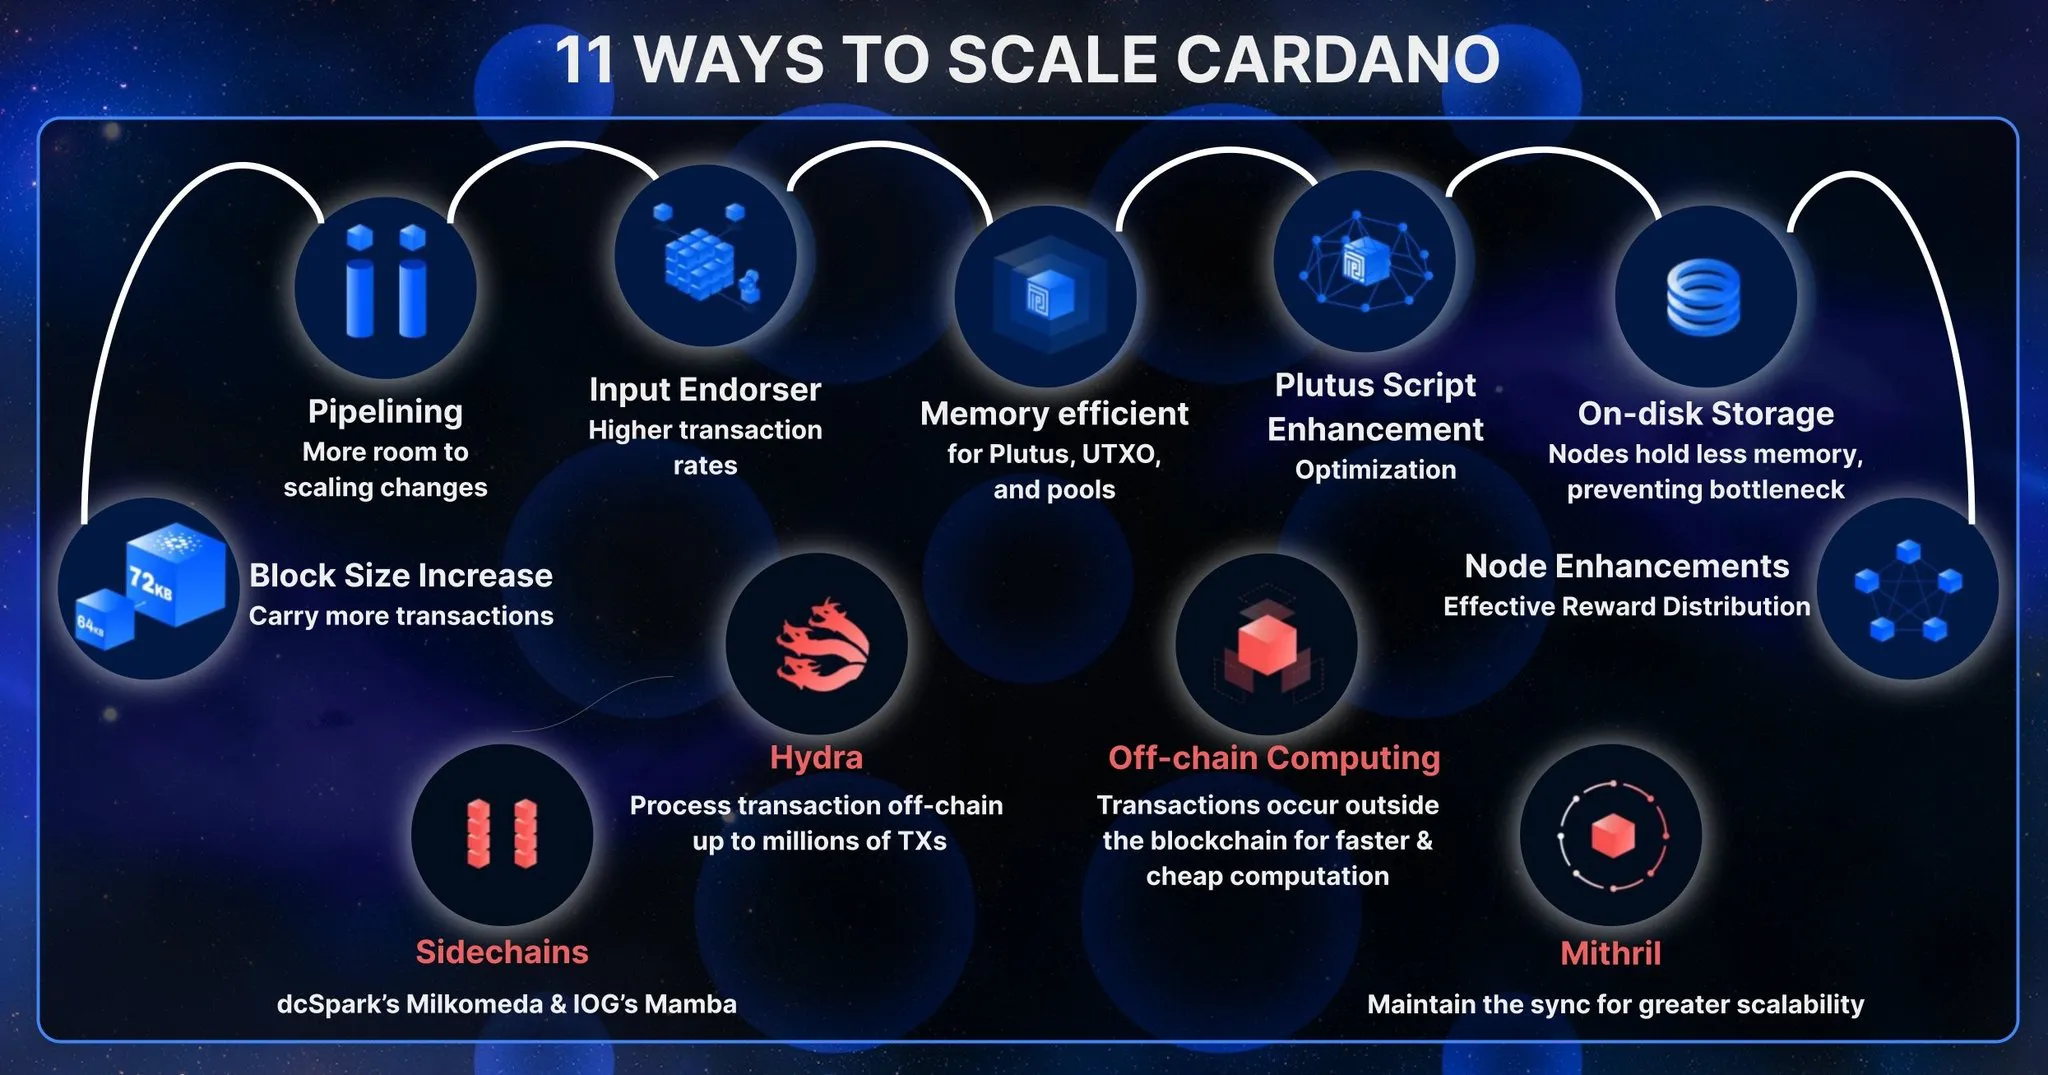 11 Cardano's scaling solutions for 2022